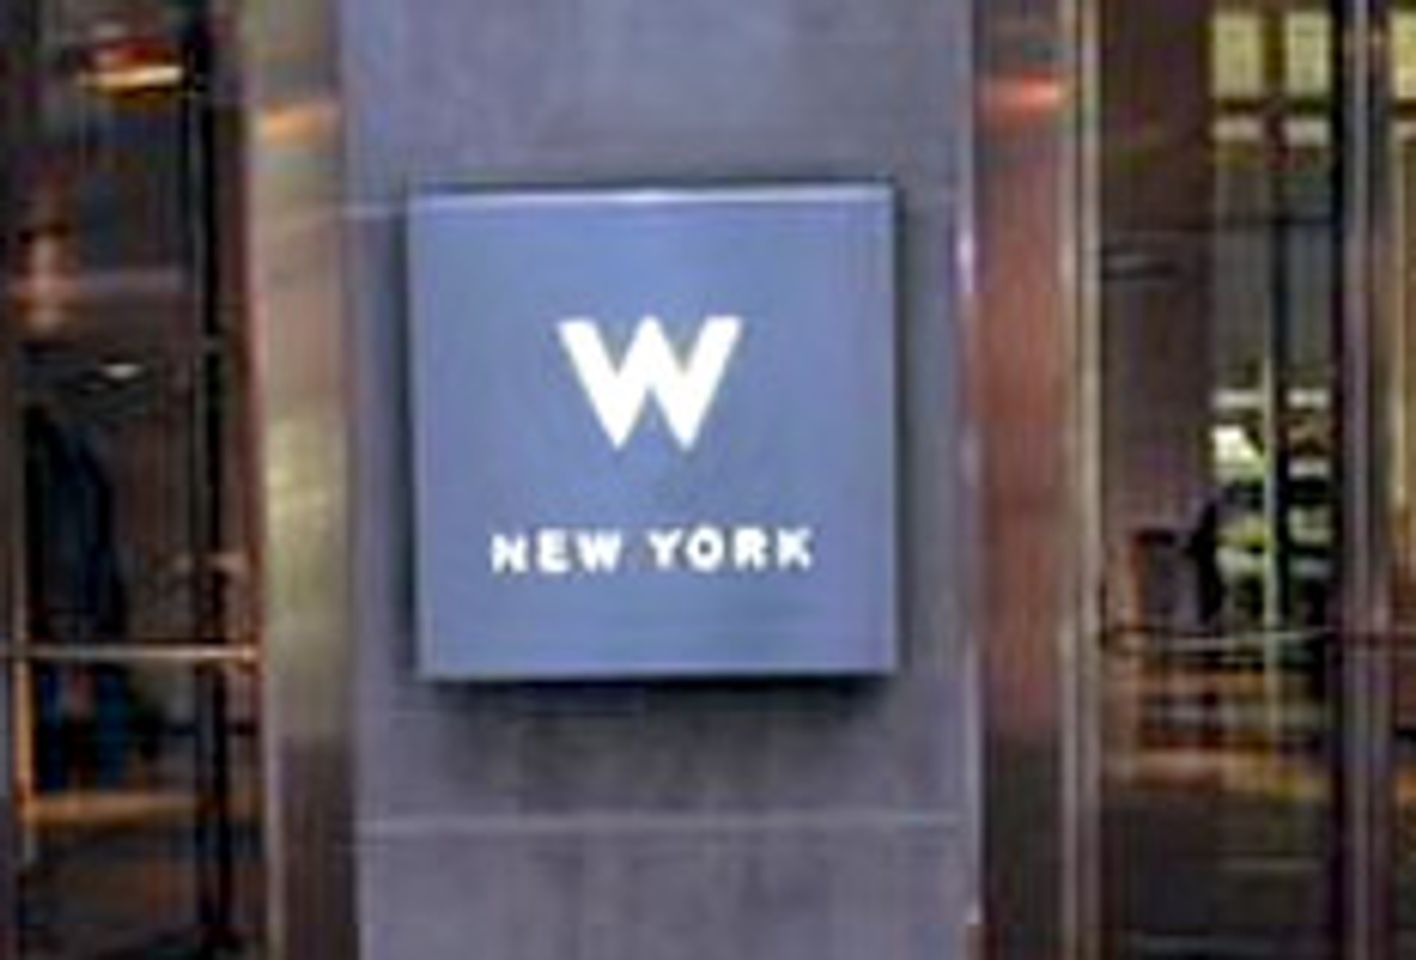 Webmaster Access Readies for New York